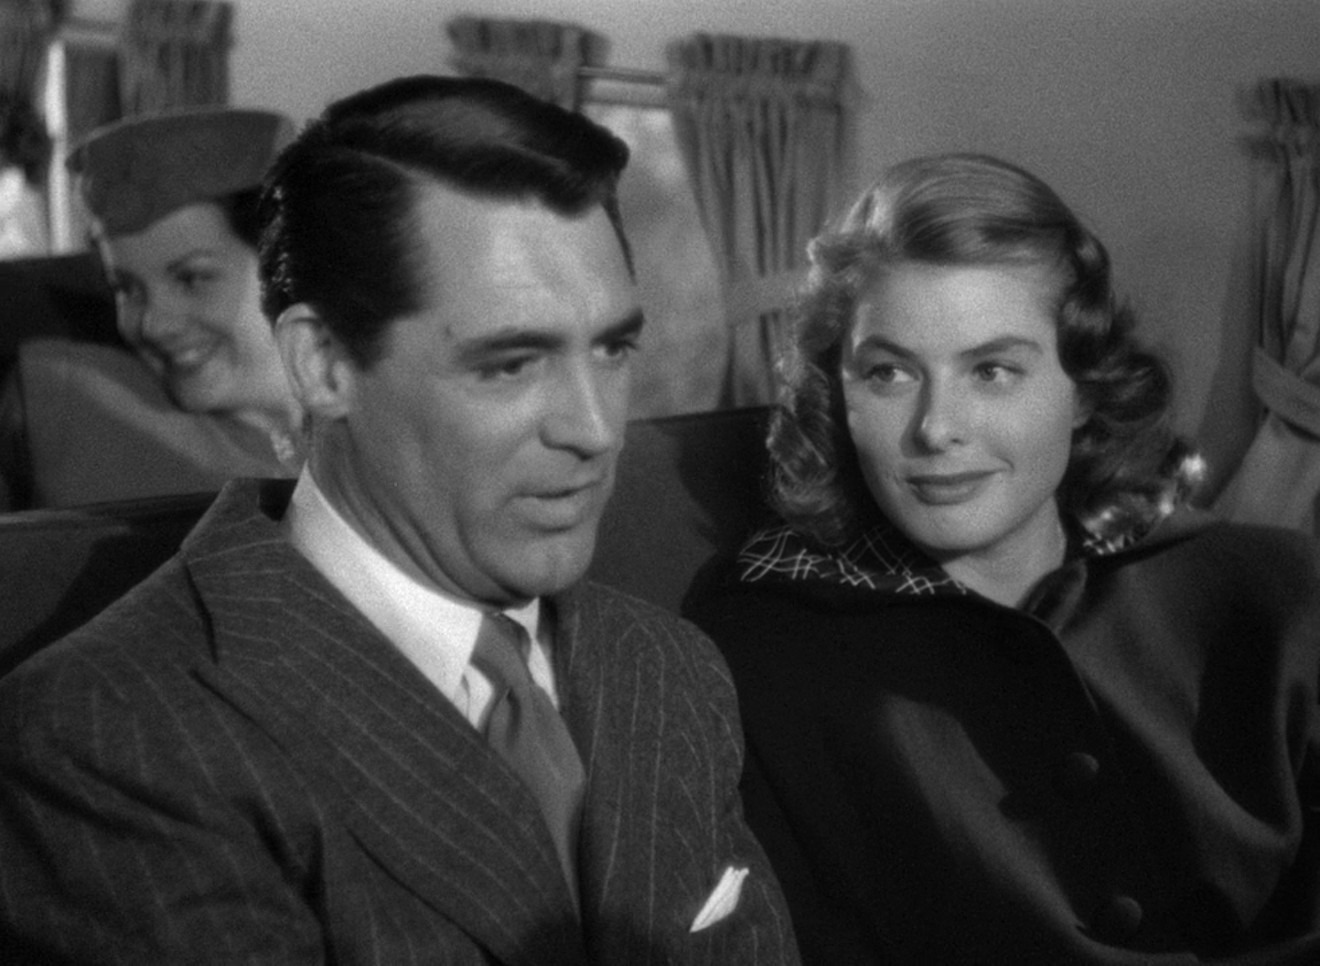 Cary Grant and Ingrid Bergman in Alfred Hitchcock’s Notorious, screening at Alamo Drafthouse Sunday afternoon.